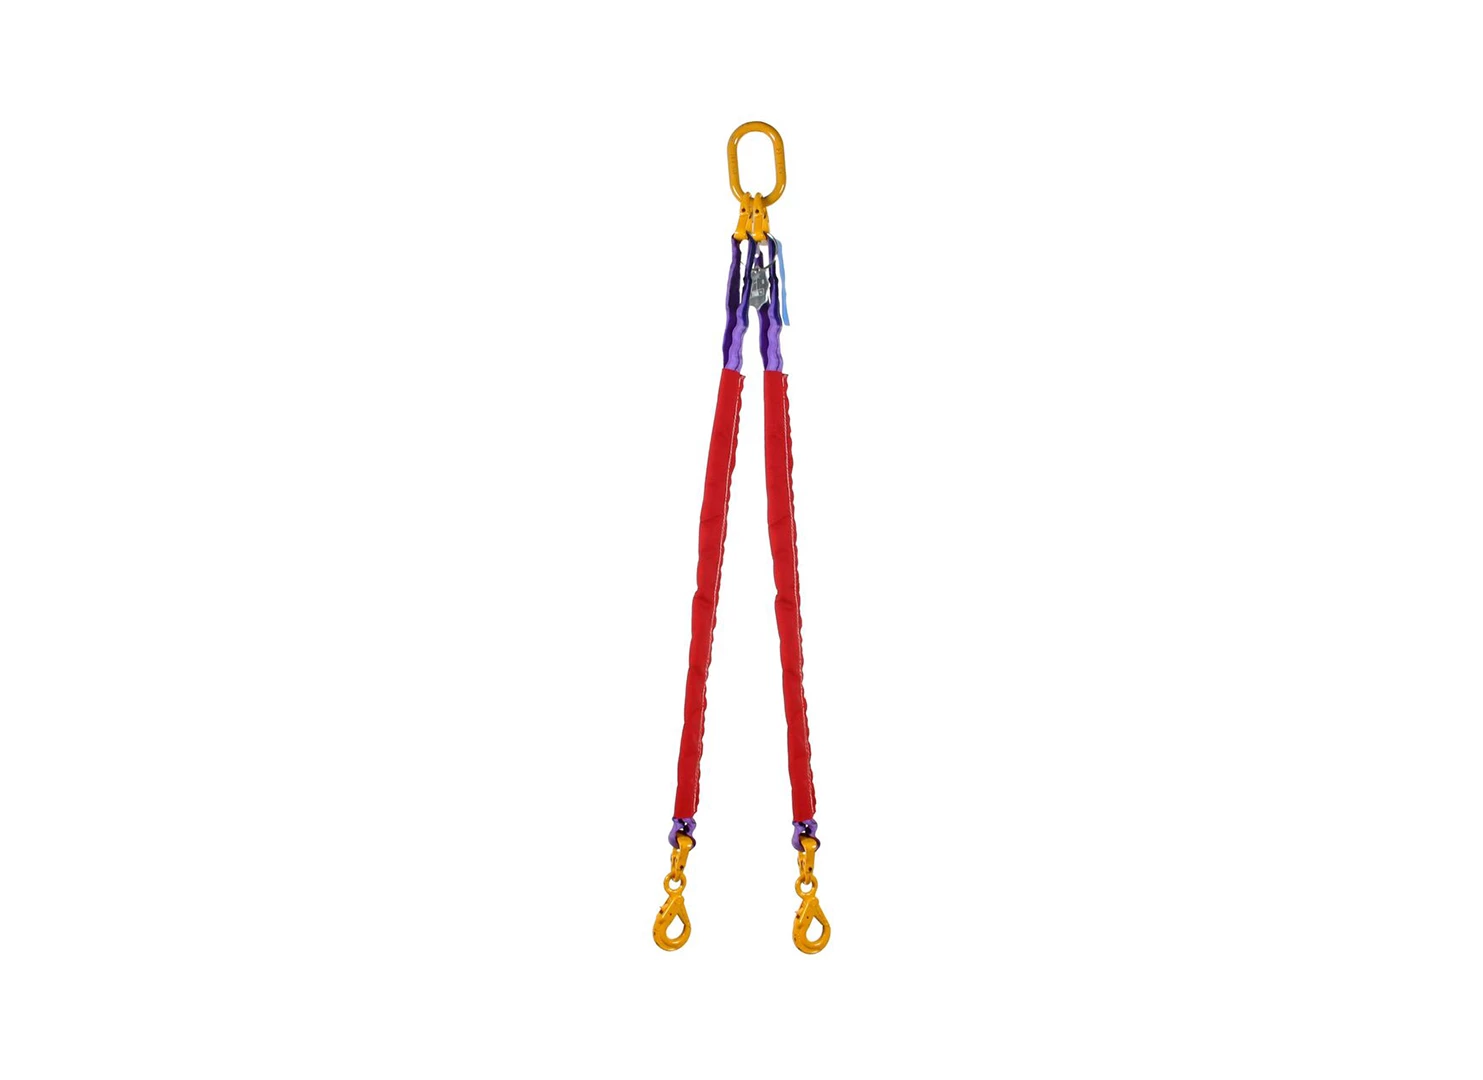 Product: Round slings 4 10.5t*3,3m